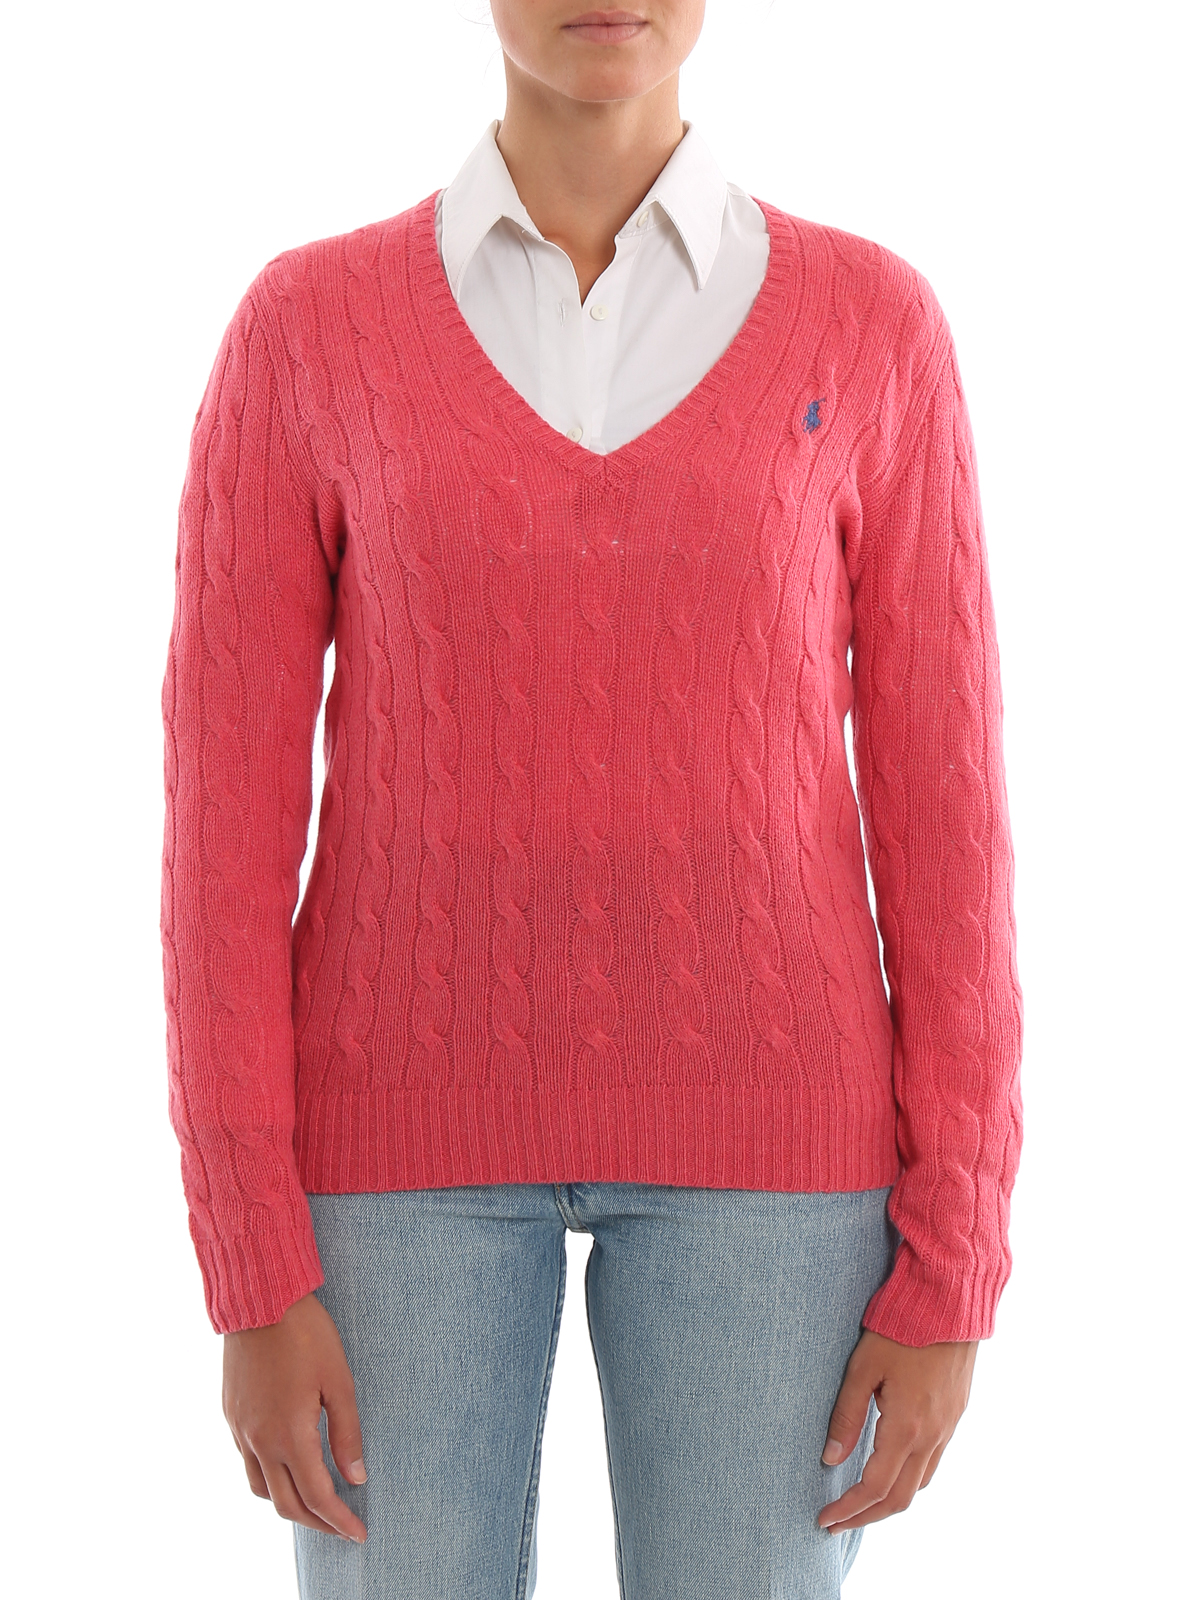 ralph lauren cable knit v neck sweater